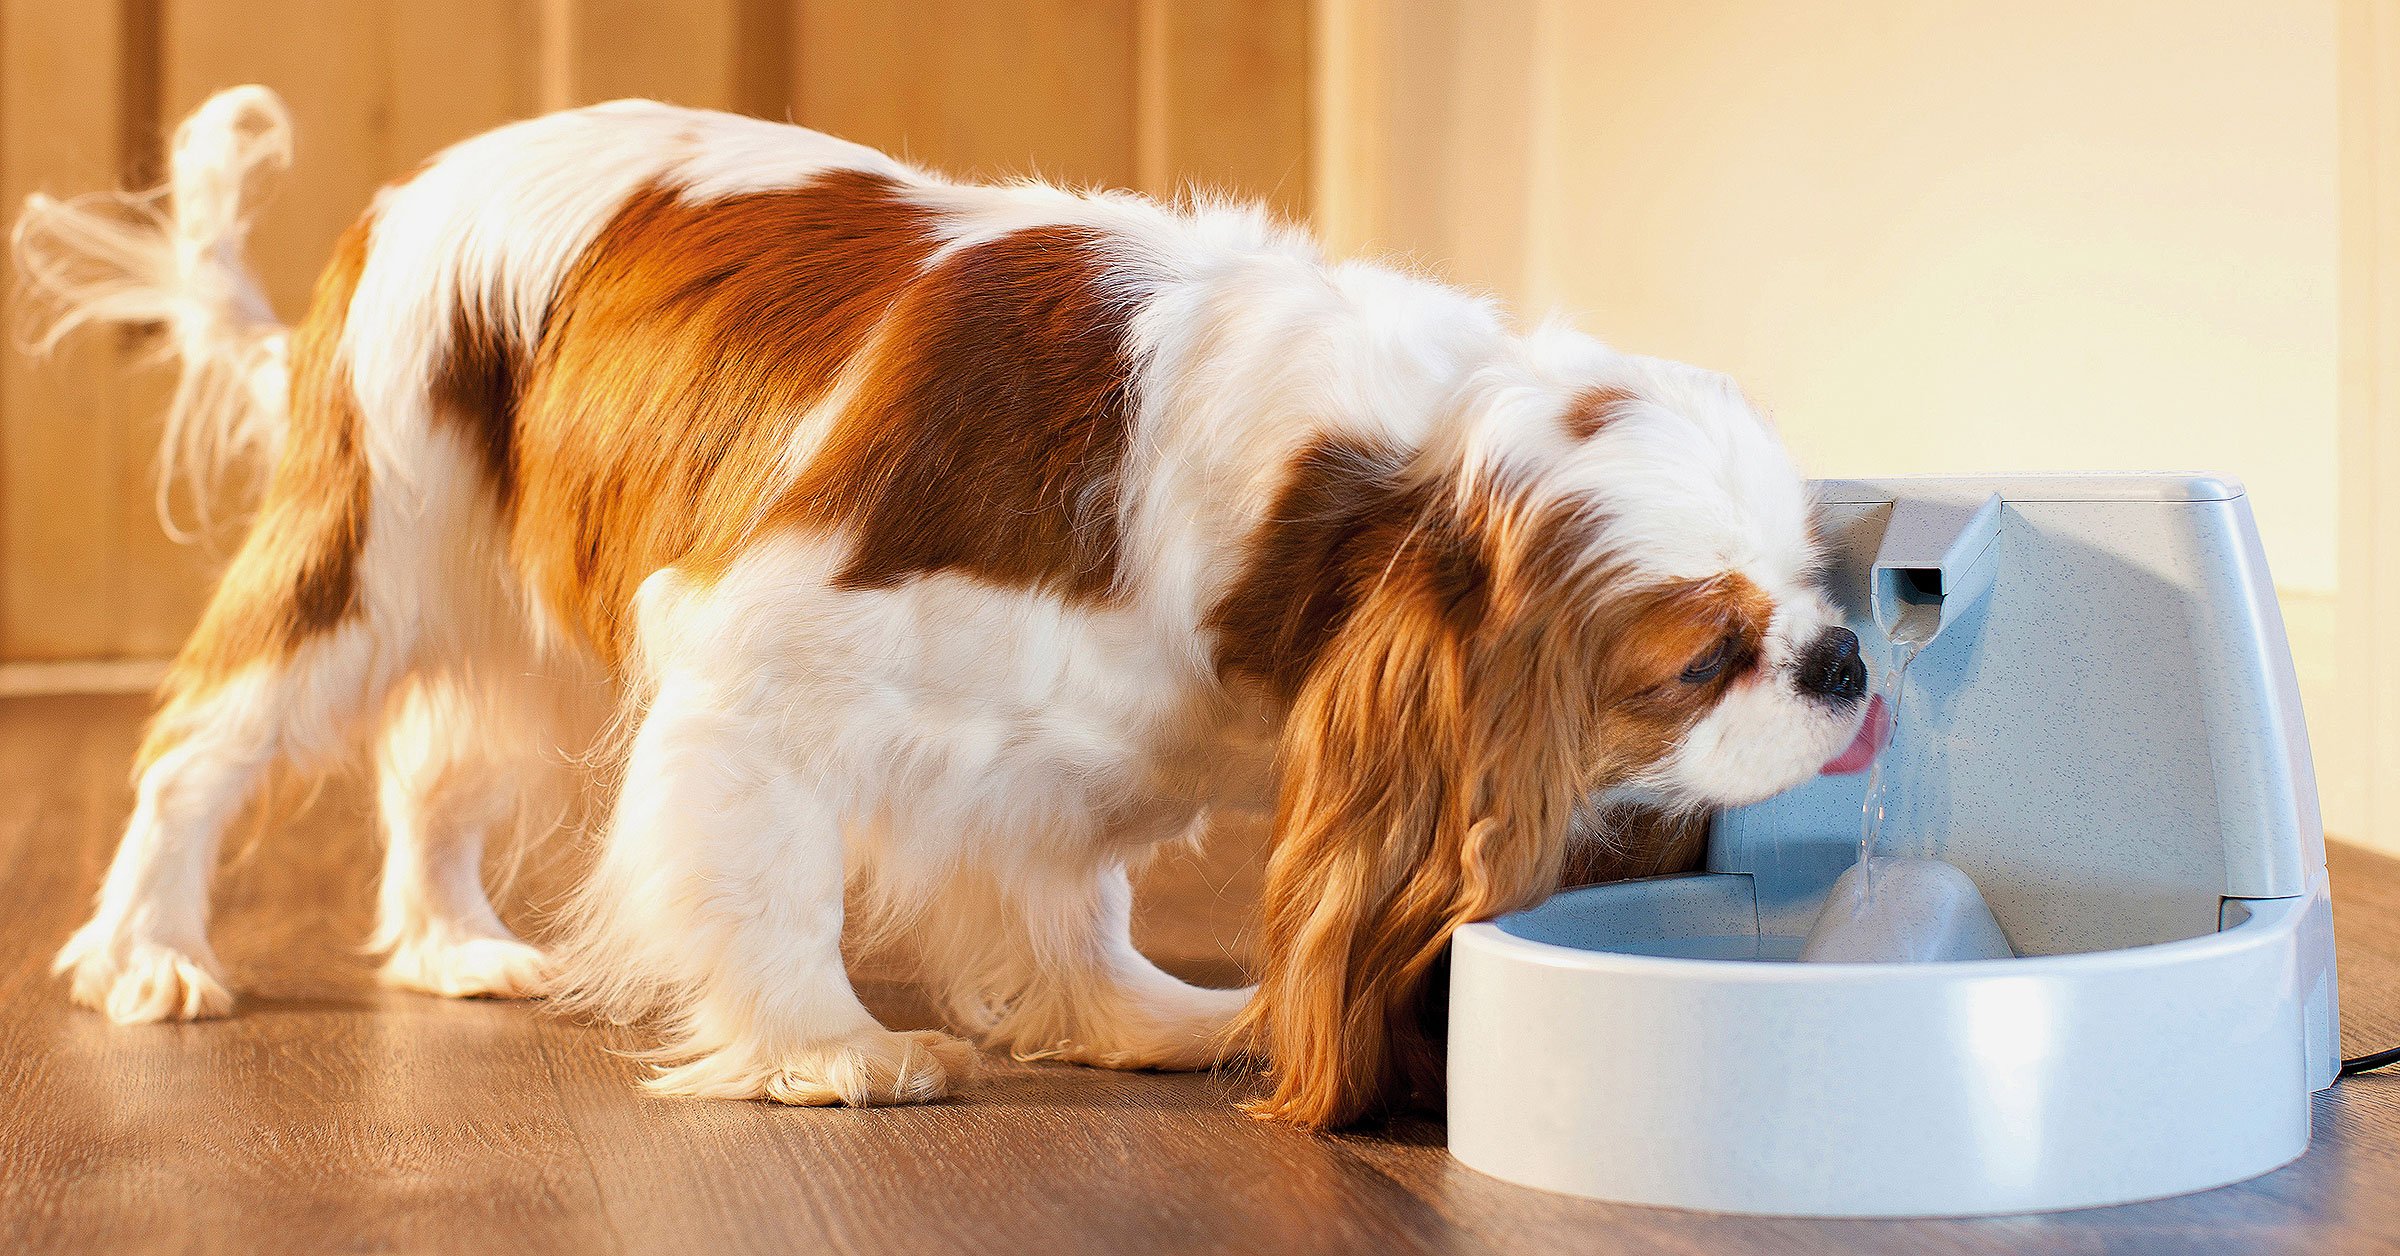 Dog drinking from a fresh water fo...</div>
					</div>
					
										
									  
					<div class=